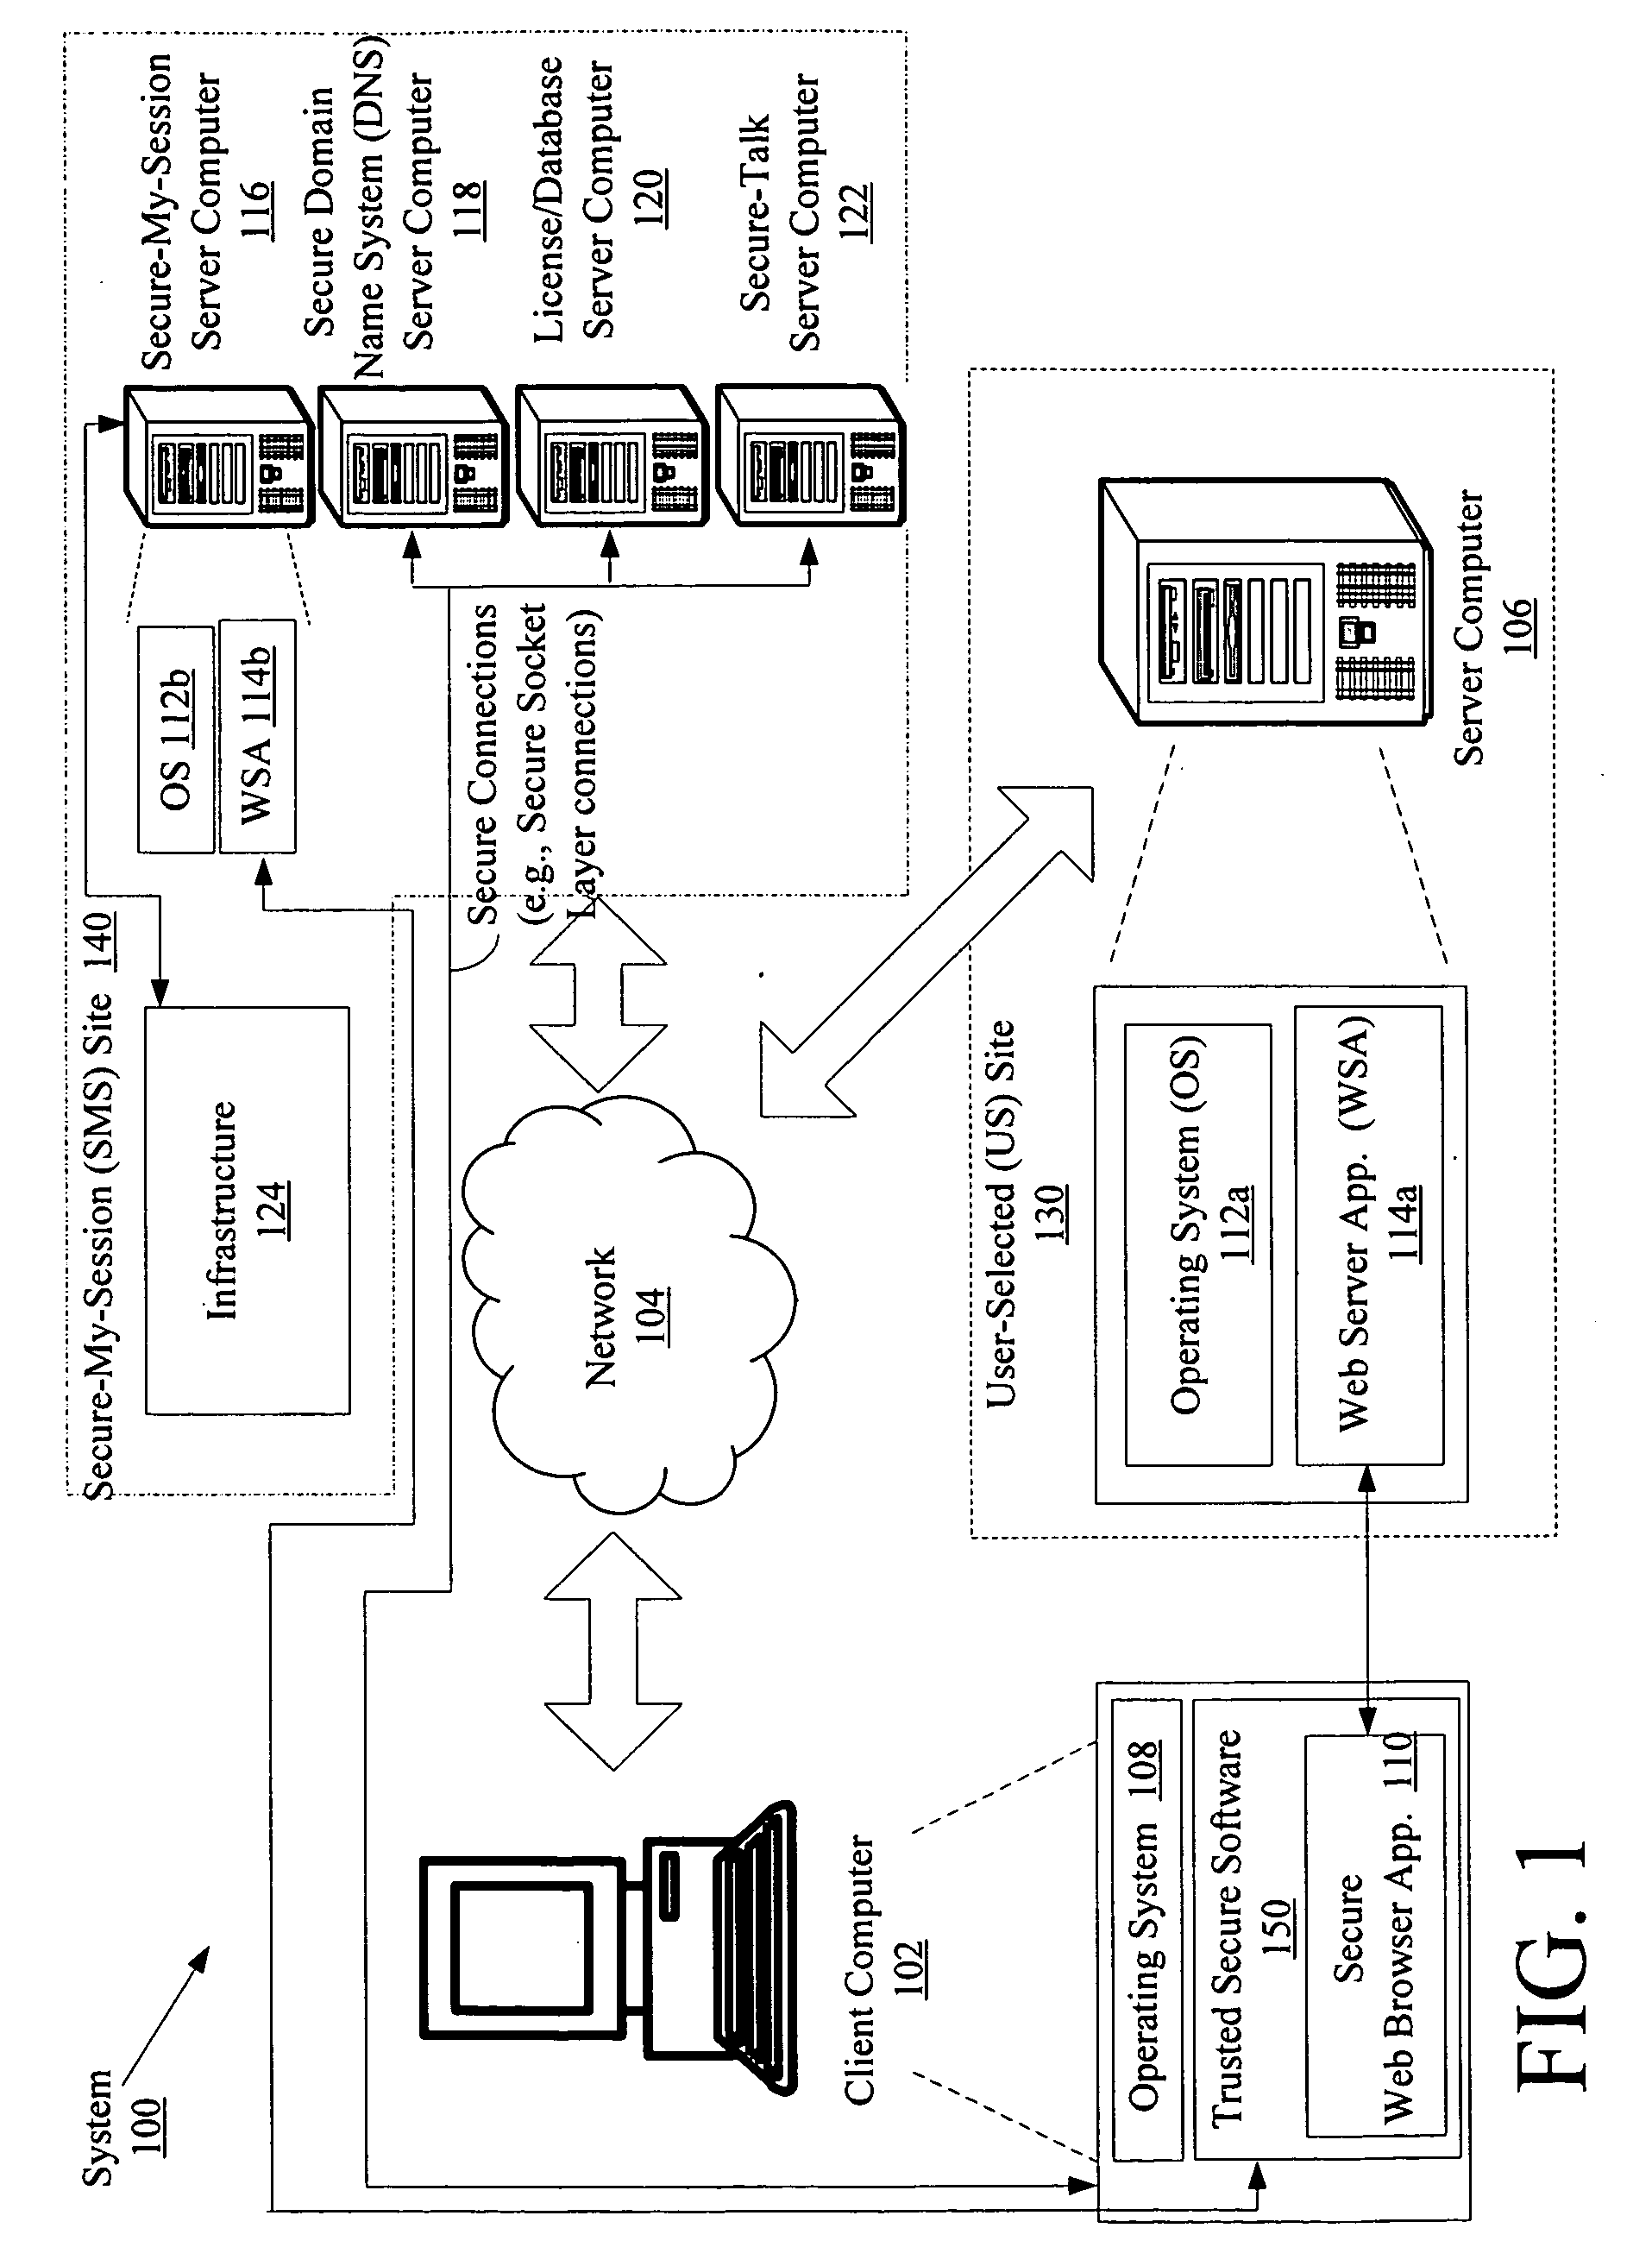 System and method for protecting data accessed through a network connection